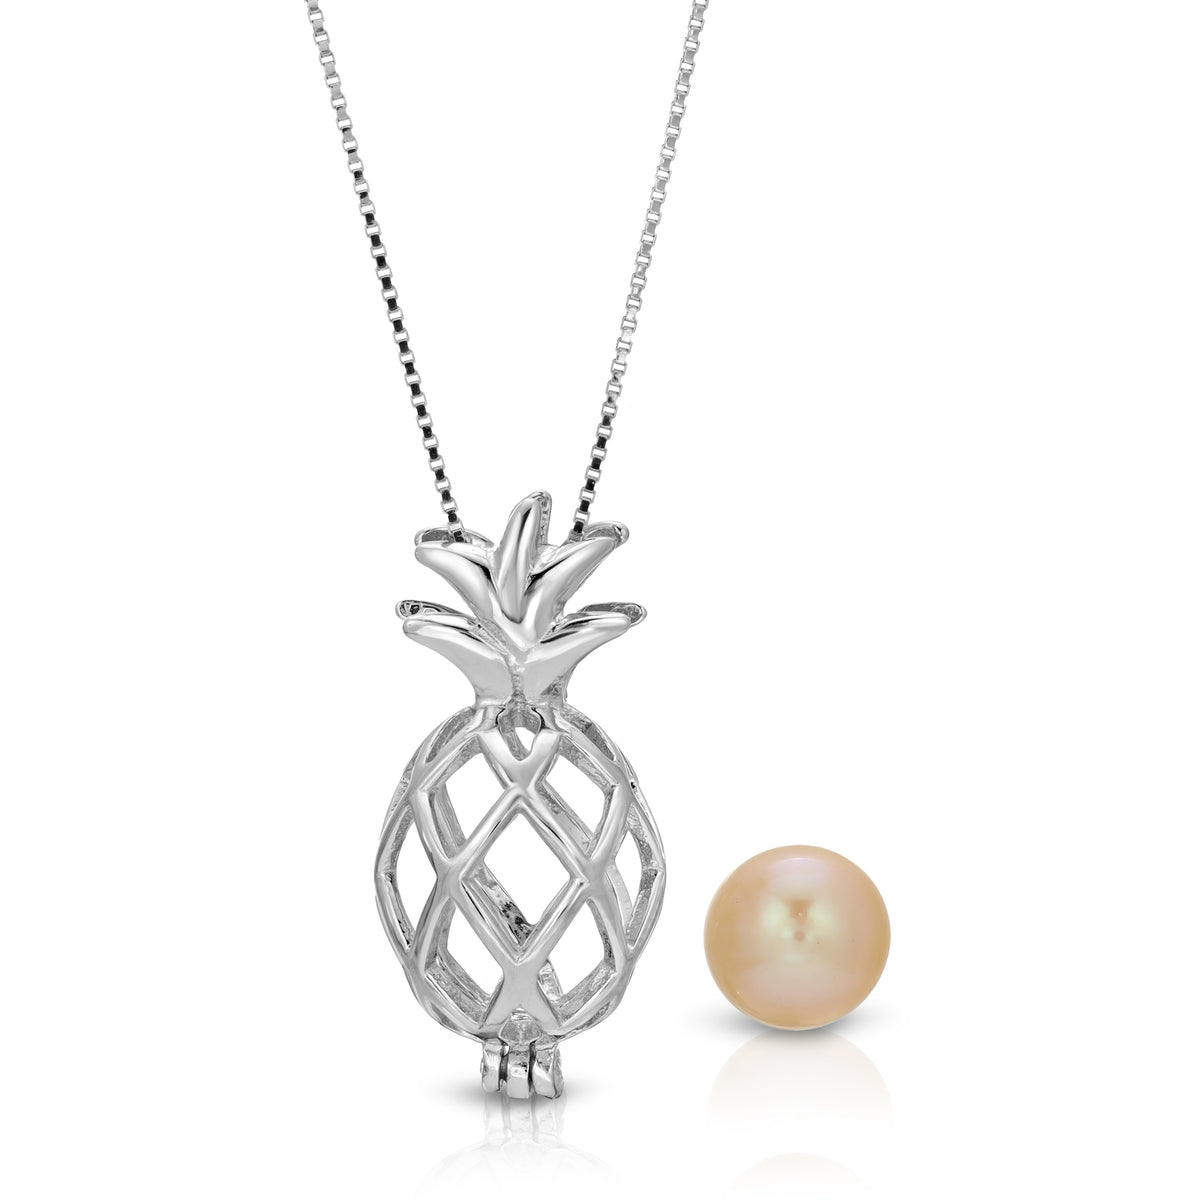 Sterling Silver Pearl Pineapple Cage Pendant - Pineapple Design Pearl Cage Pendant